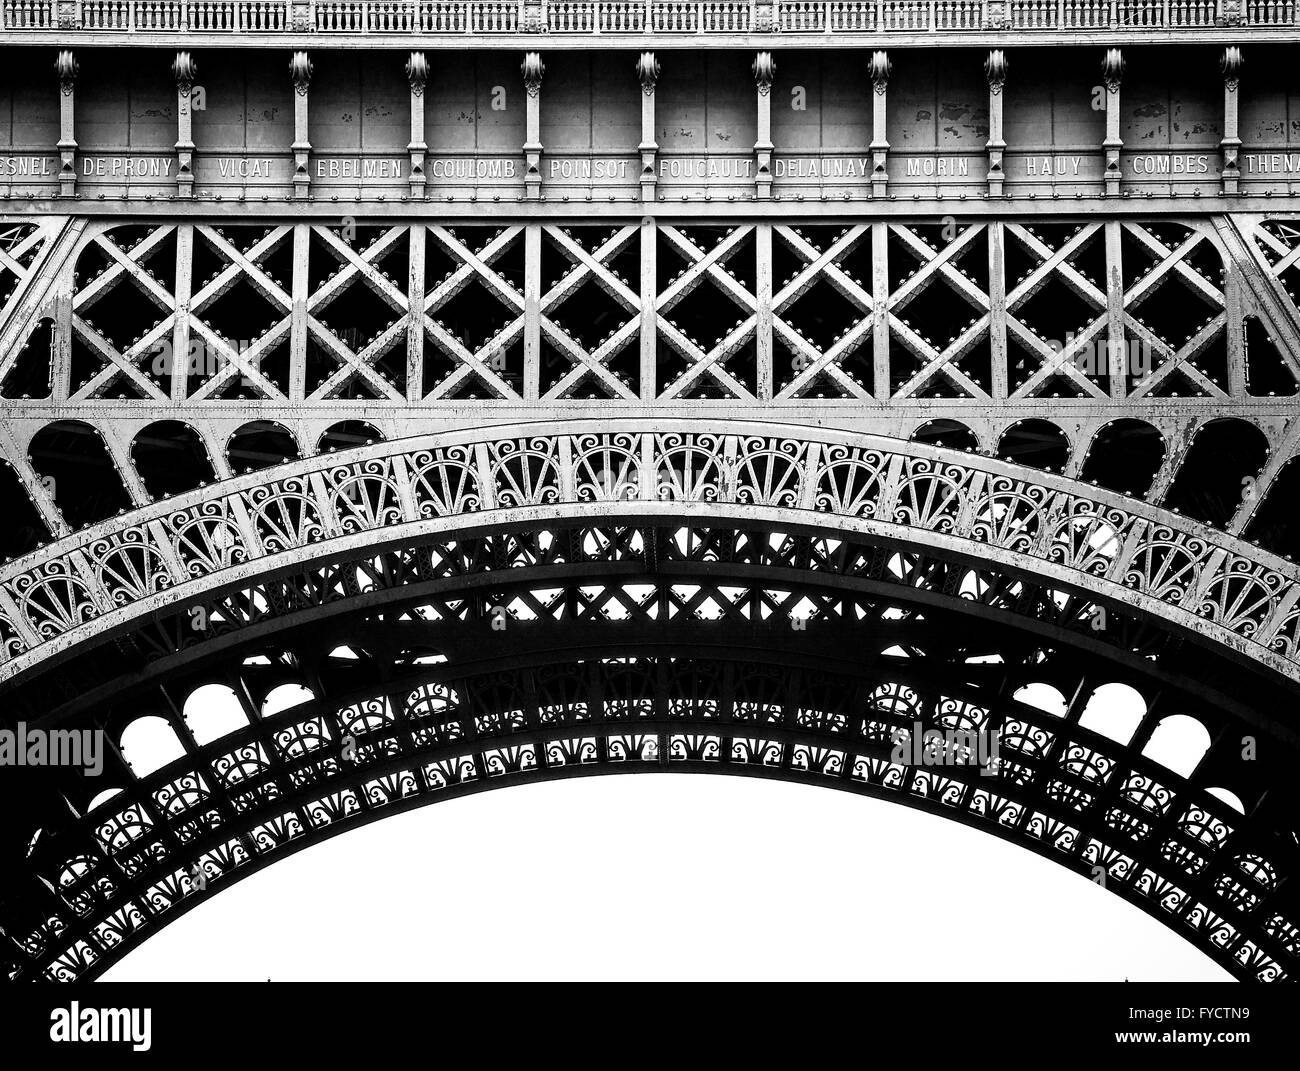 Detail of the steel structure of the Eiffel Tower in monochrome and high key. Stock Photo